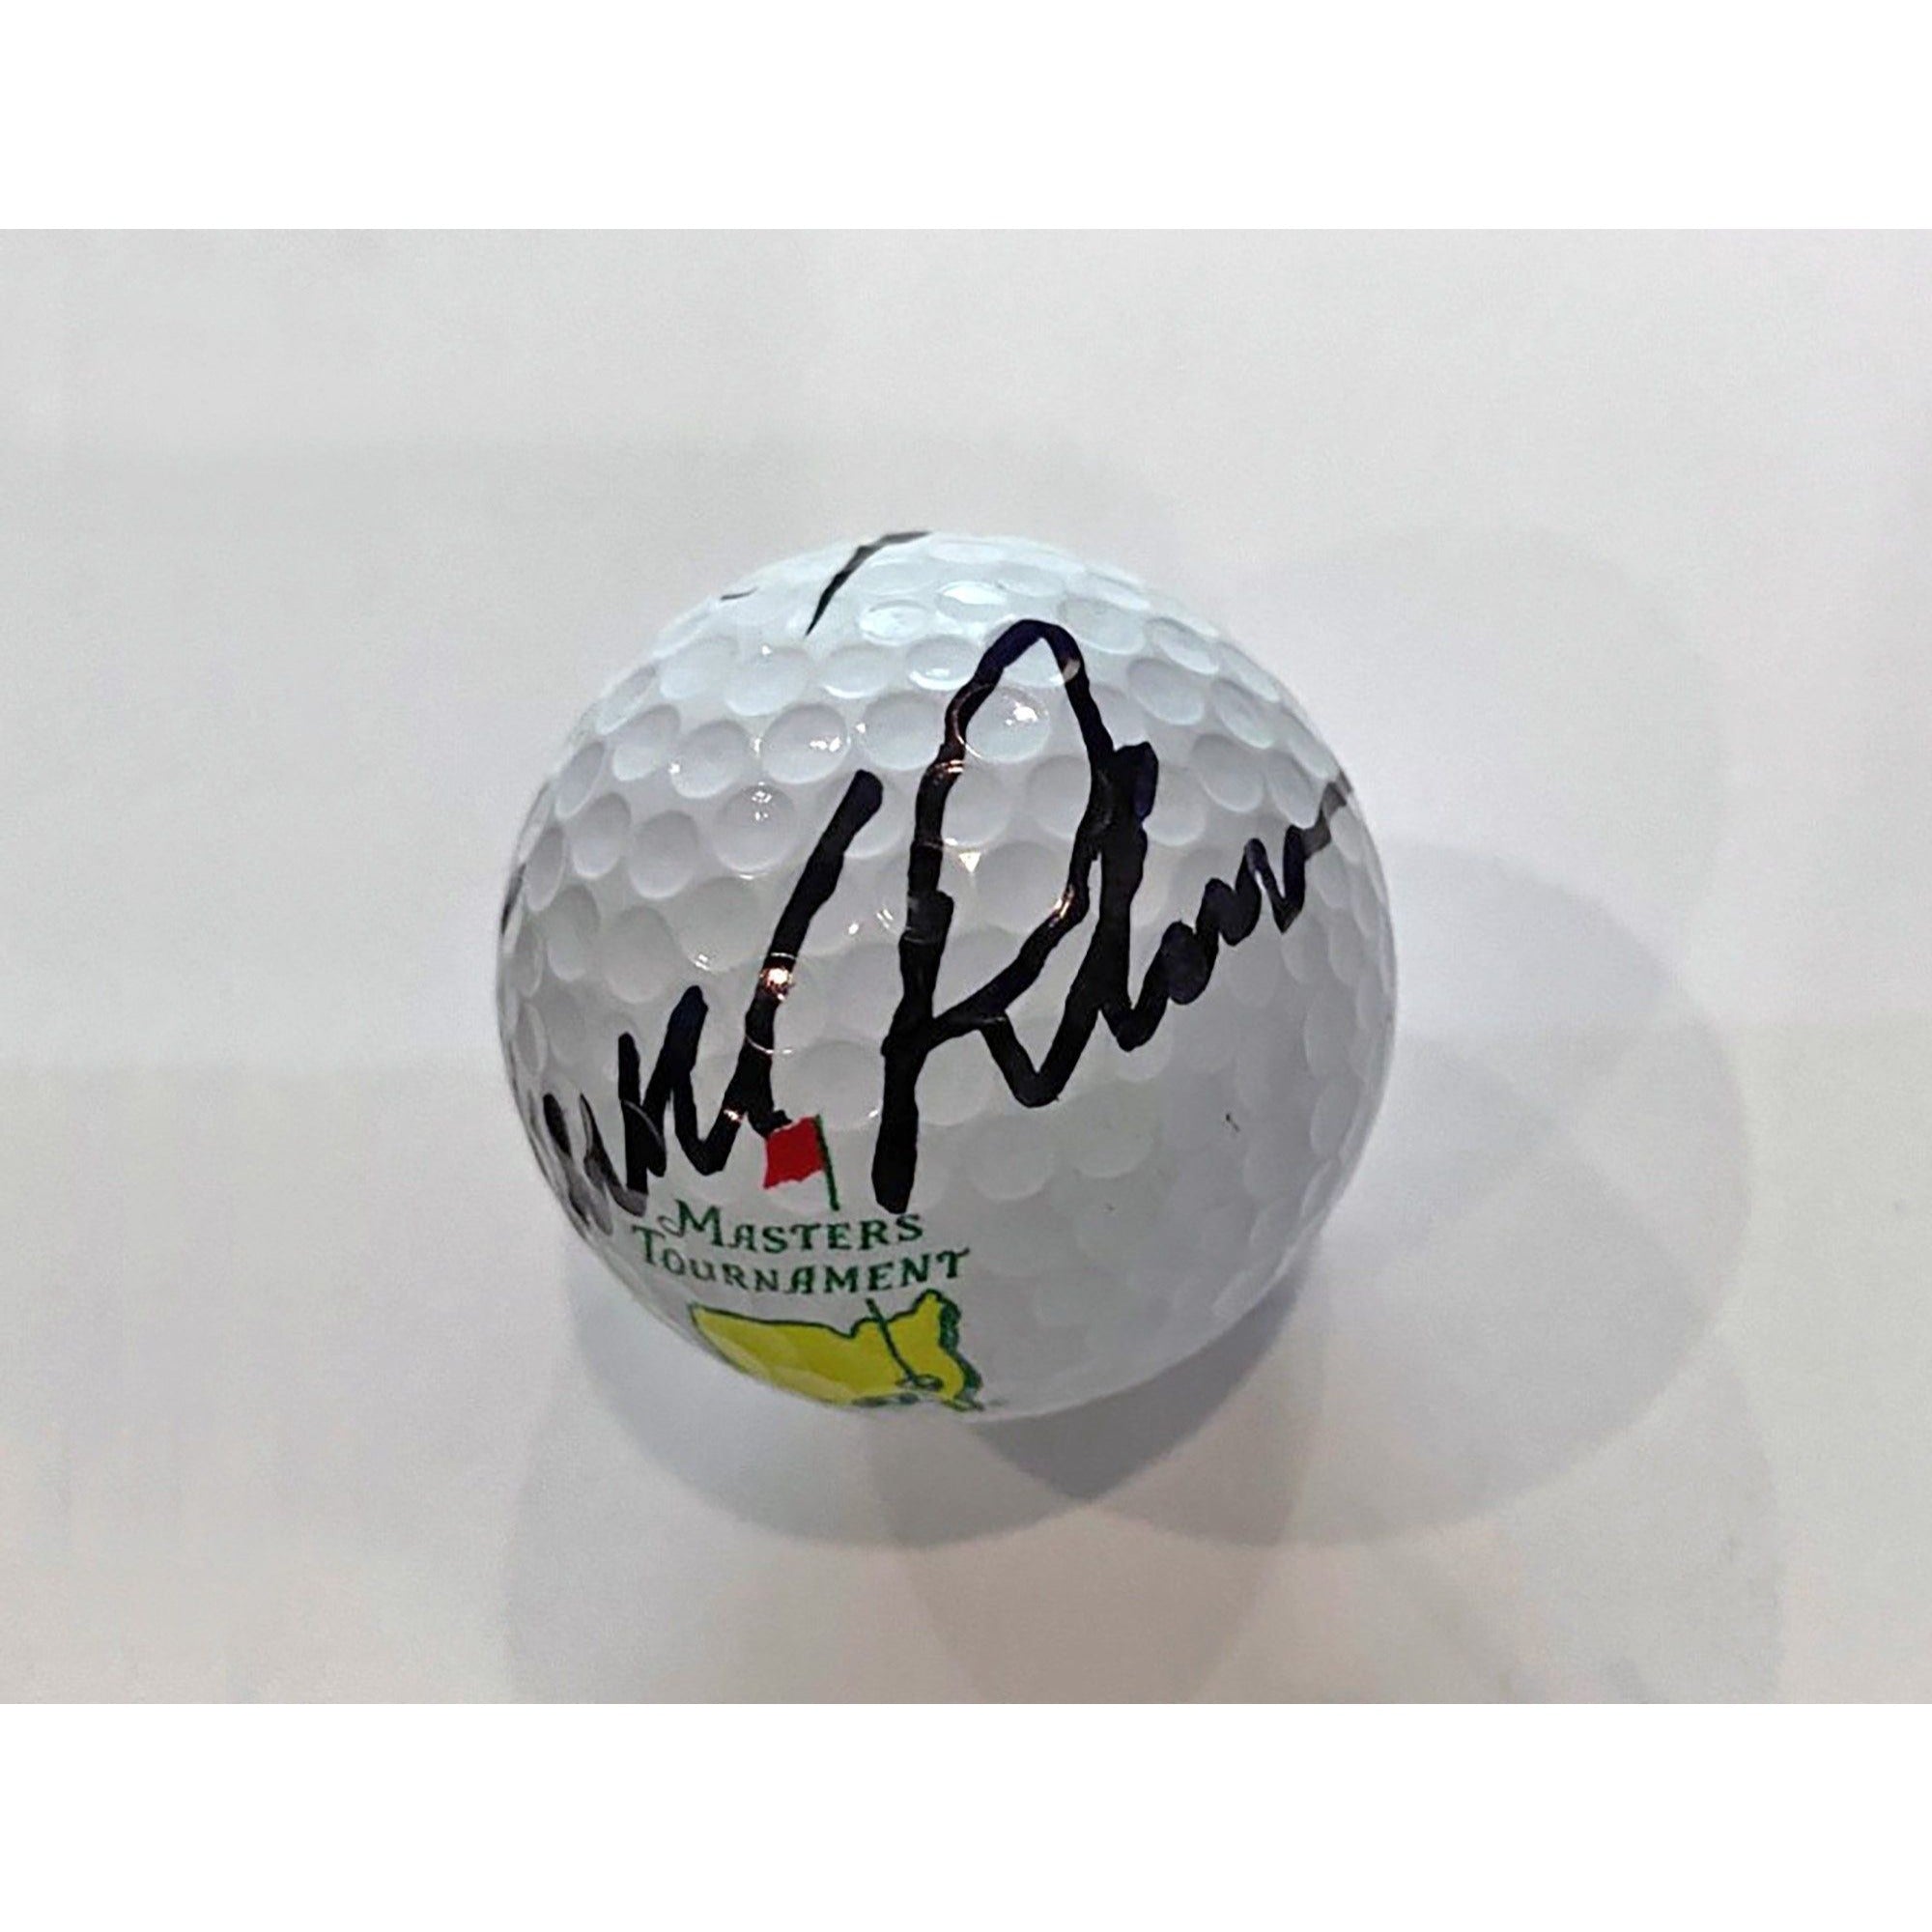 Arnold Palmer Master signed golf ball with proof